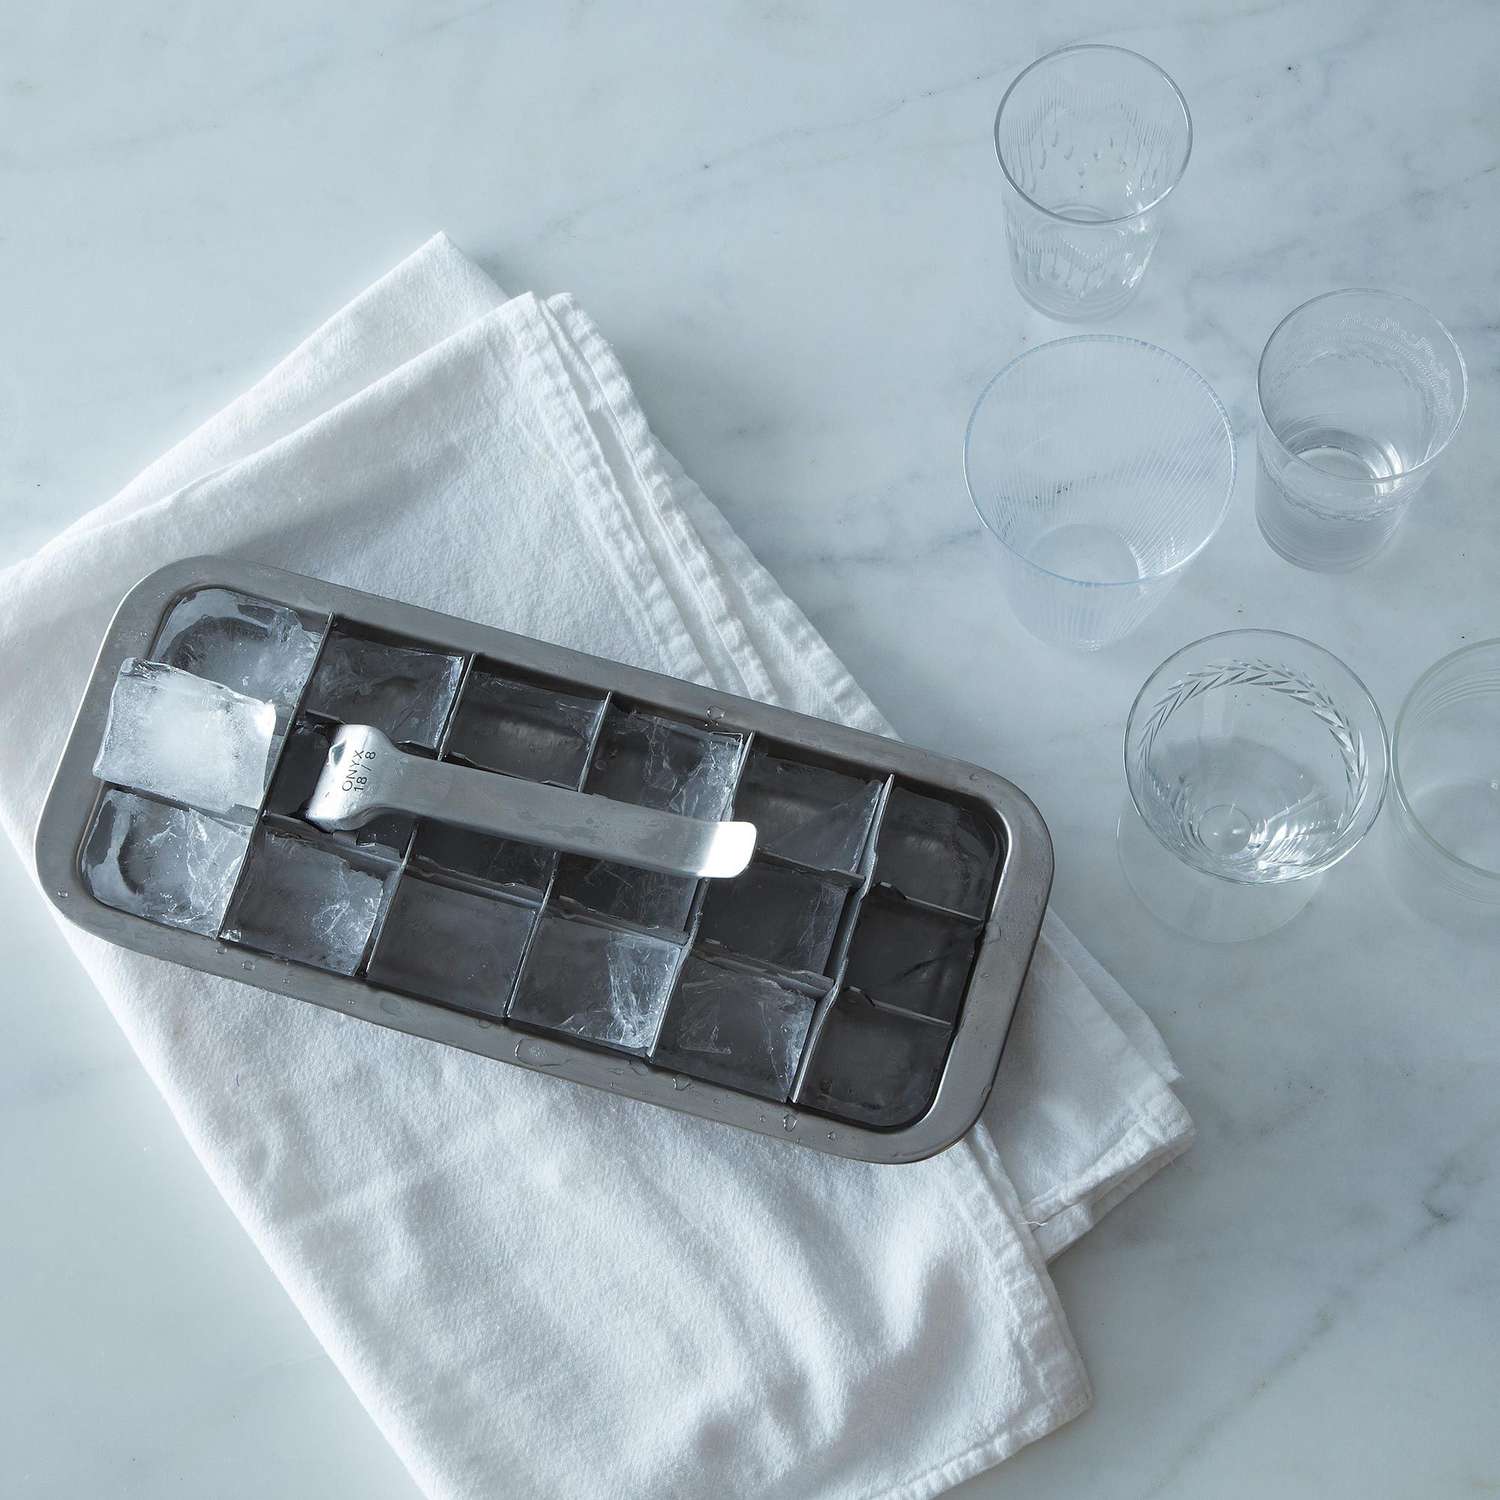 Onyx Stainless Steel Ice-Cube Tray